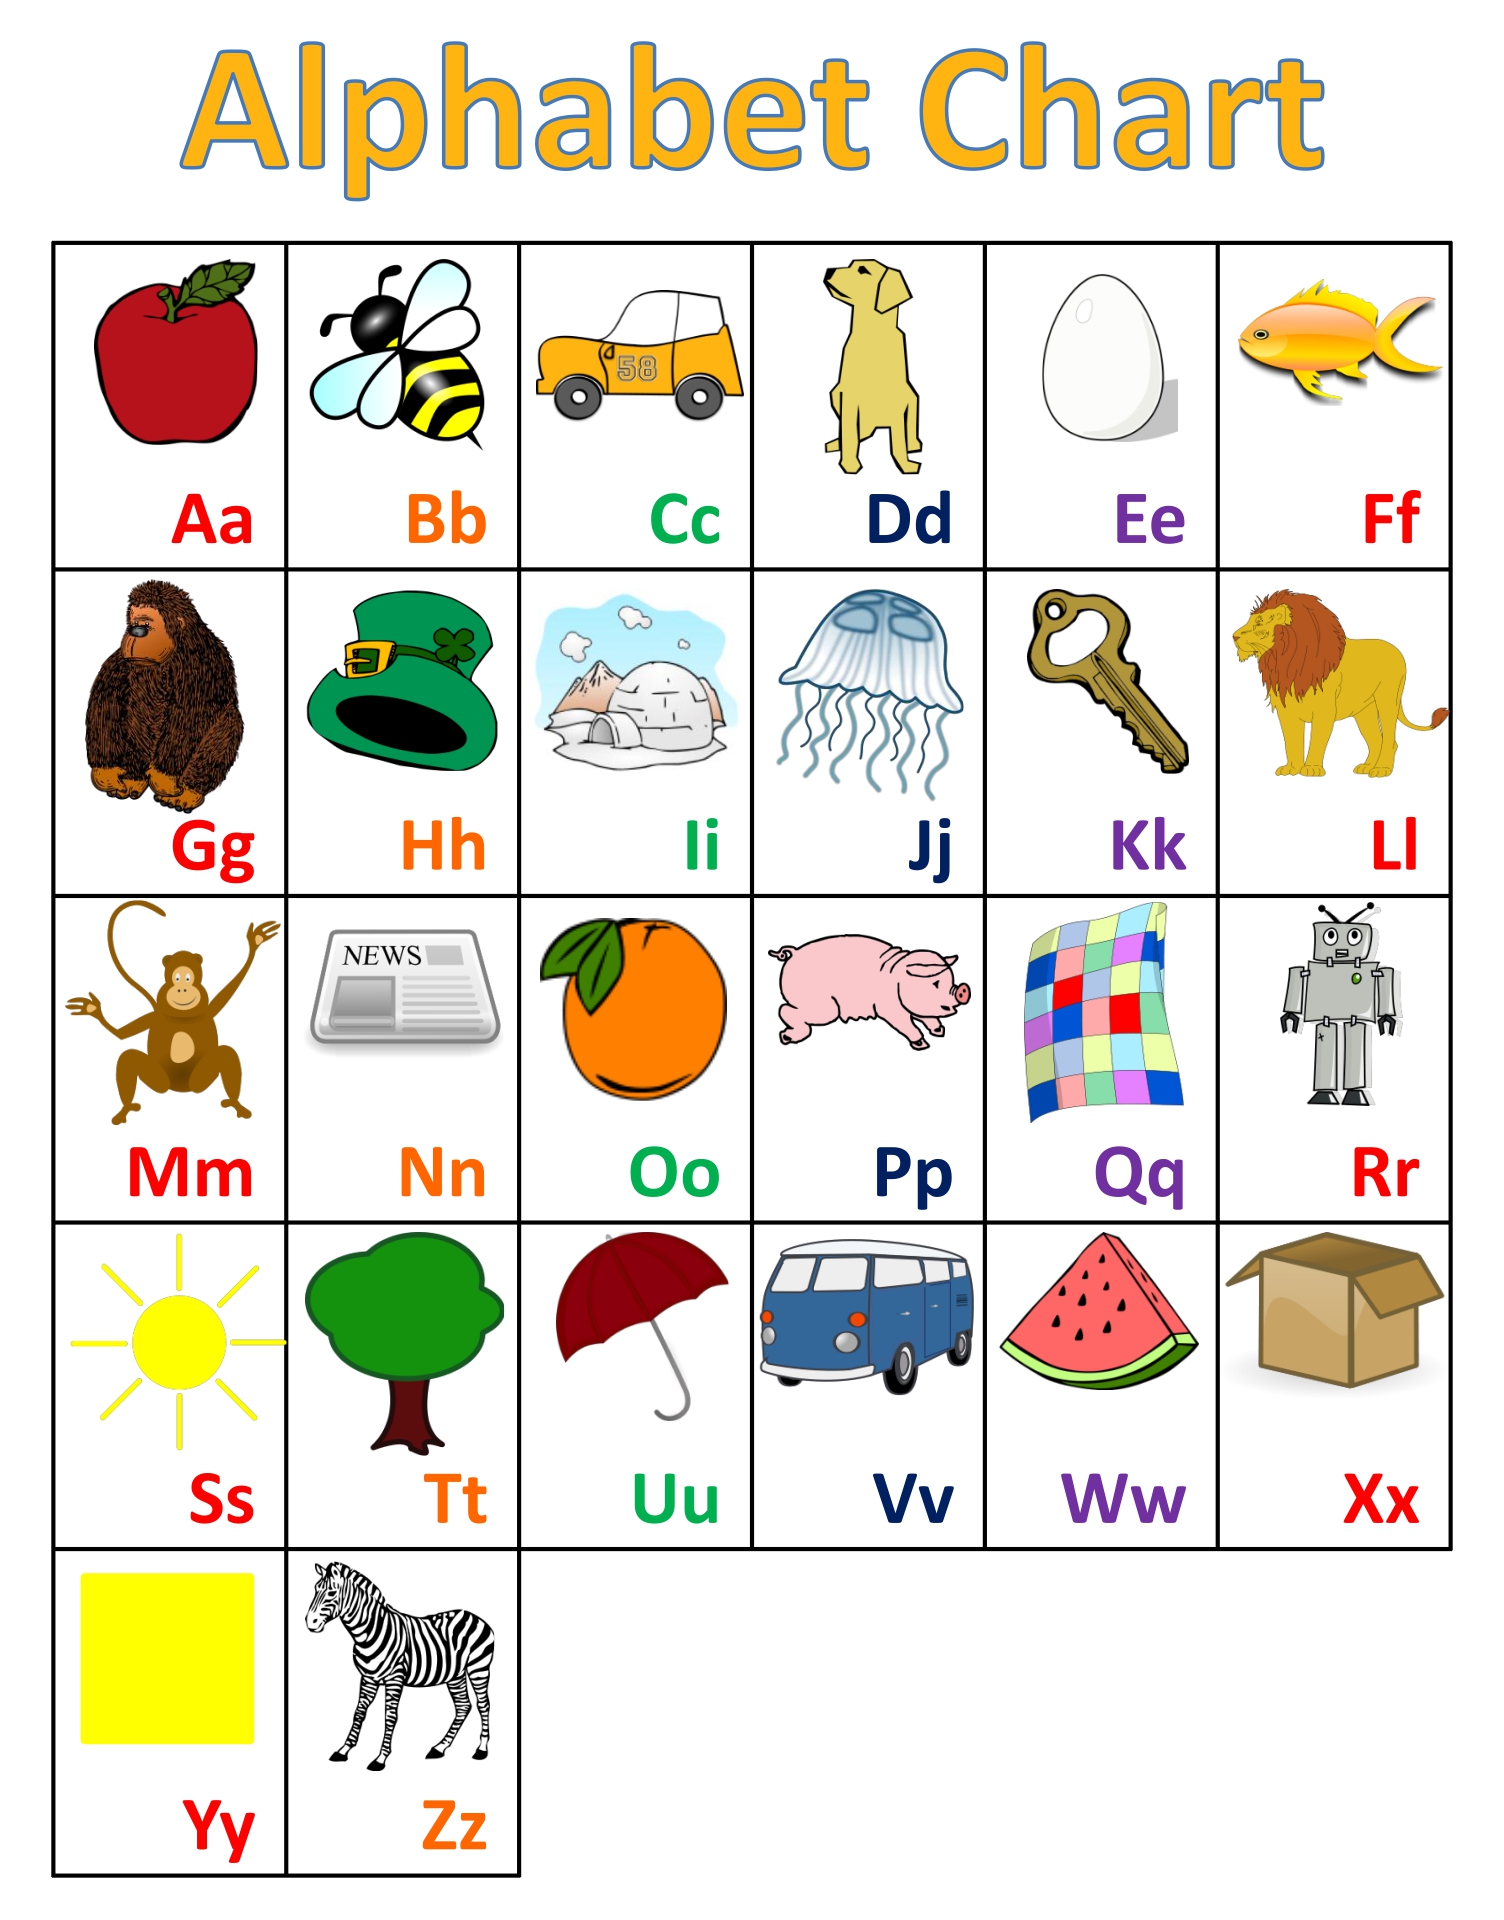 free-chart-and-flash-cards-for-learning-the-alphabet-teachersmag-flashcards-for-kids